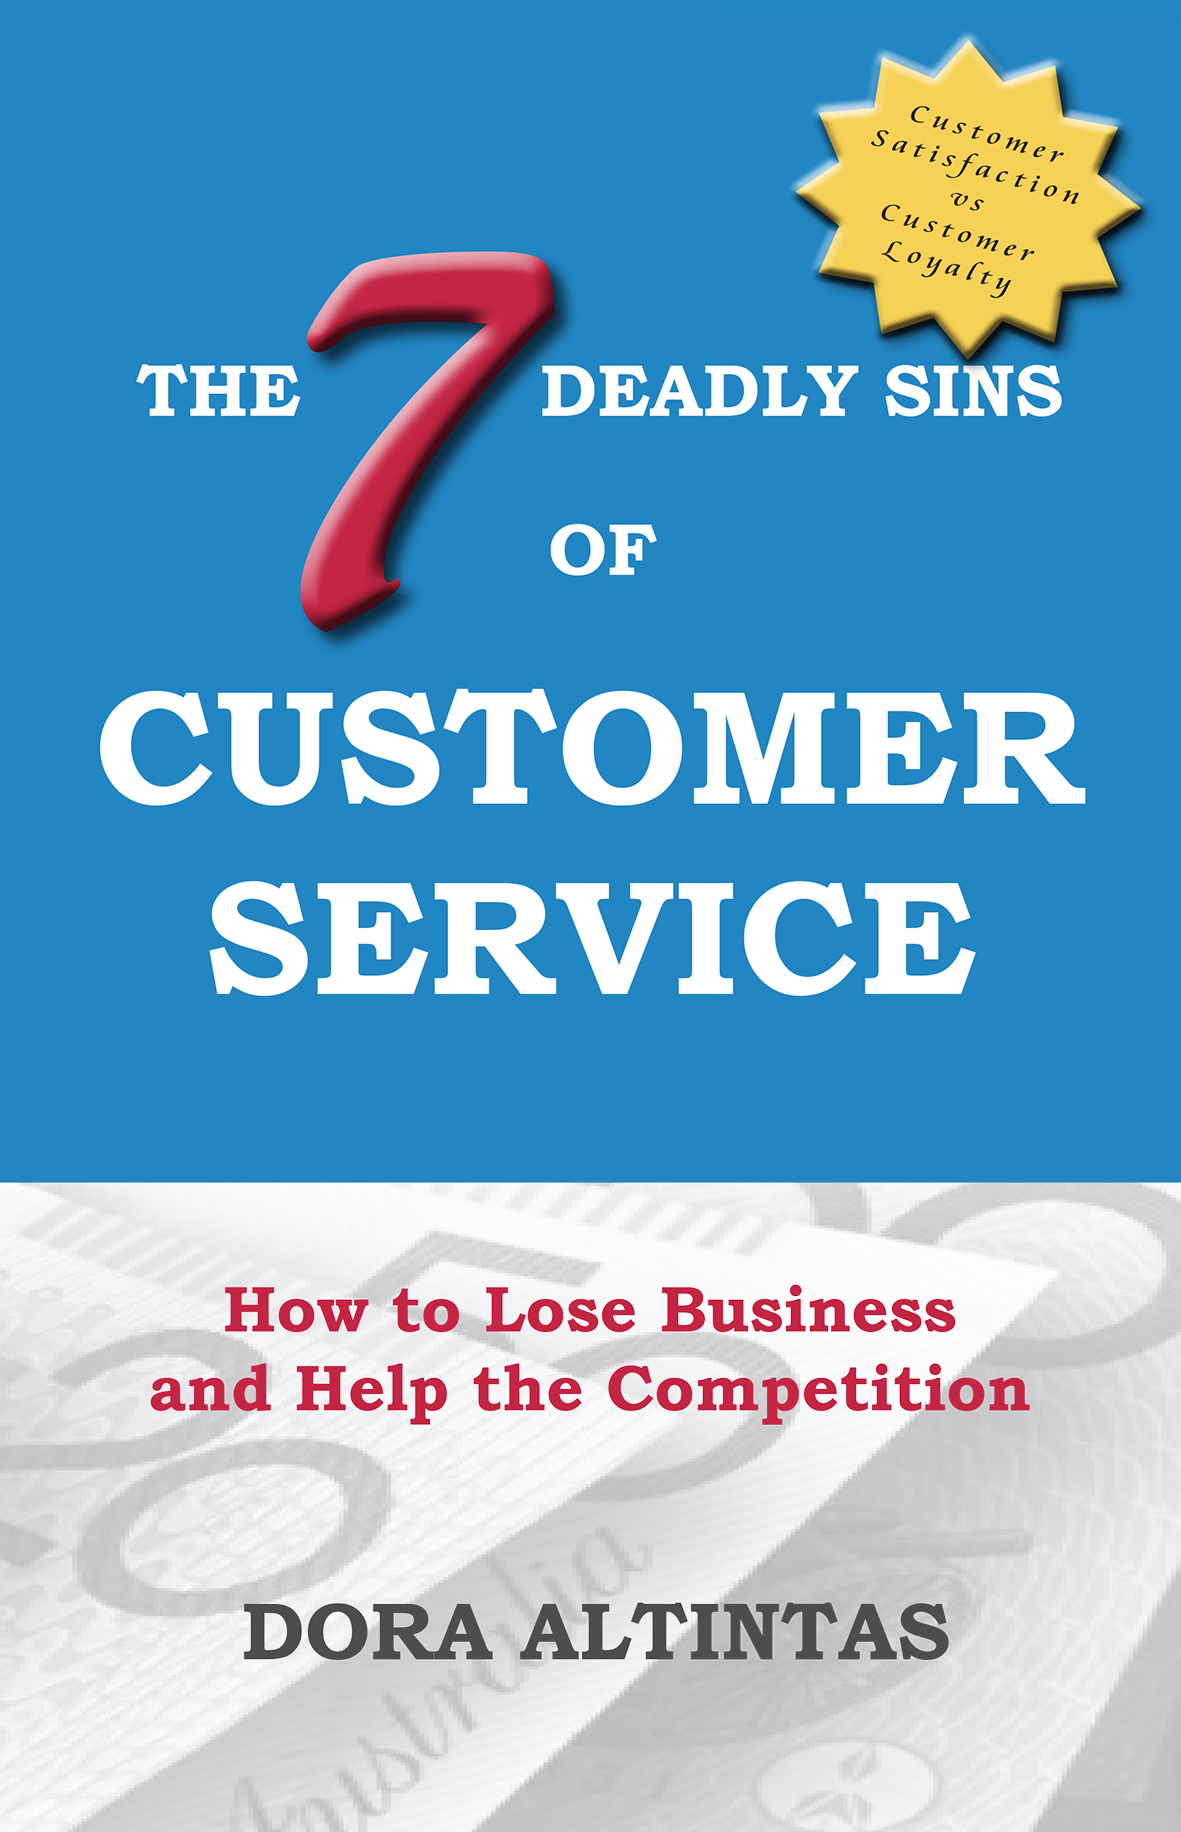 The 7 Deadly Sins of Customer Service